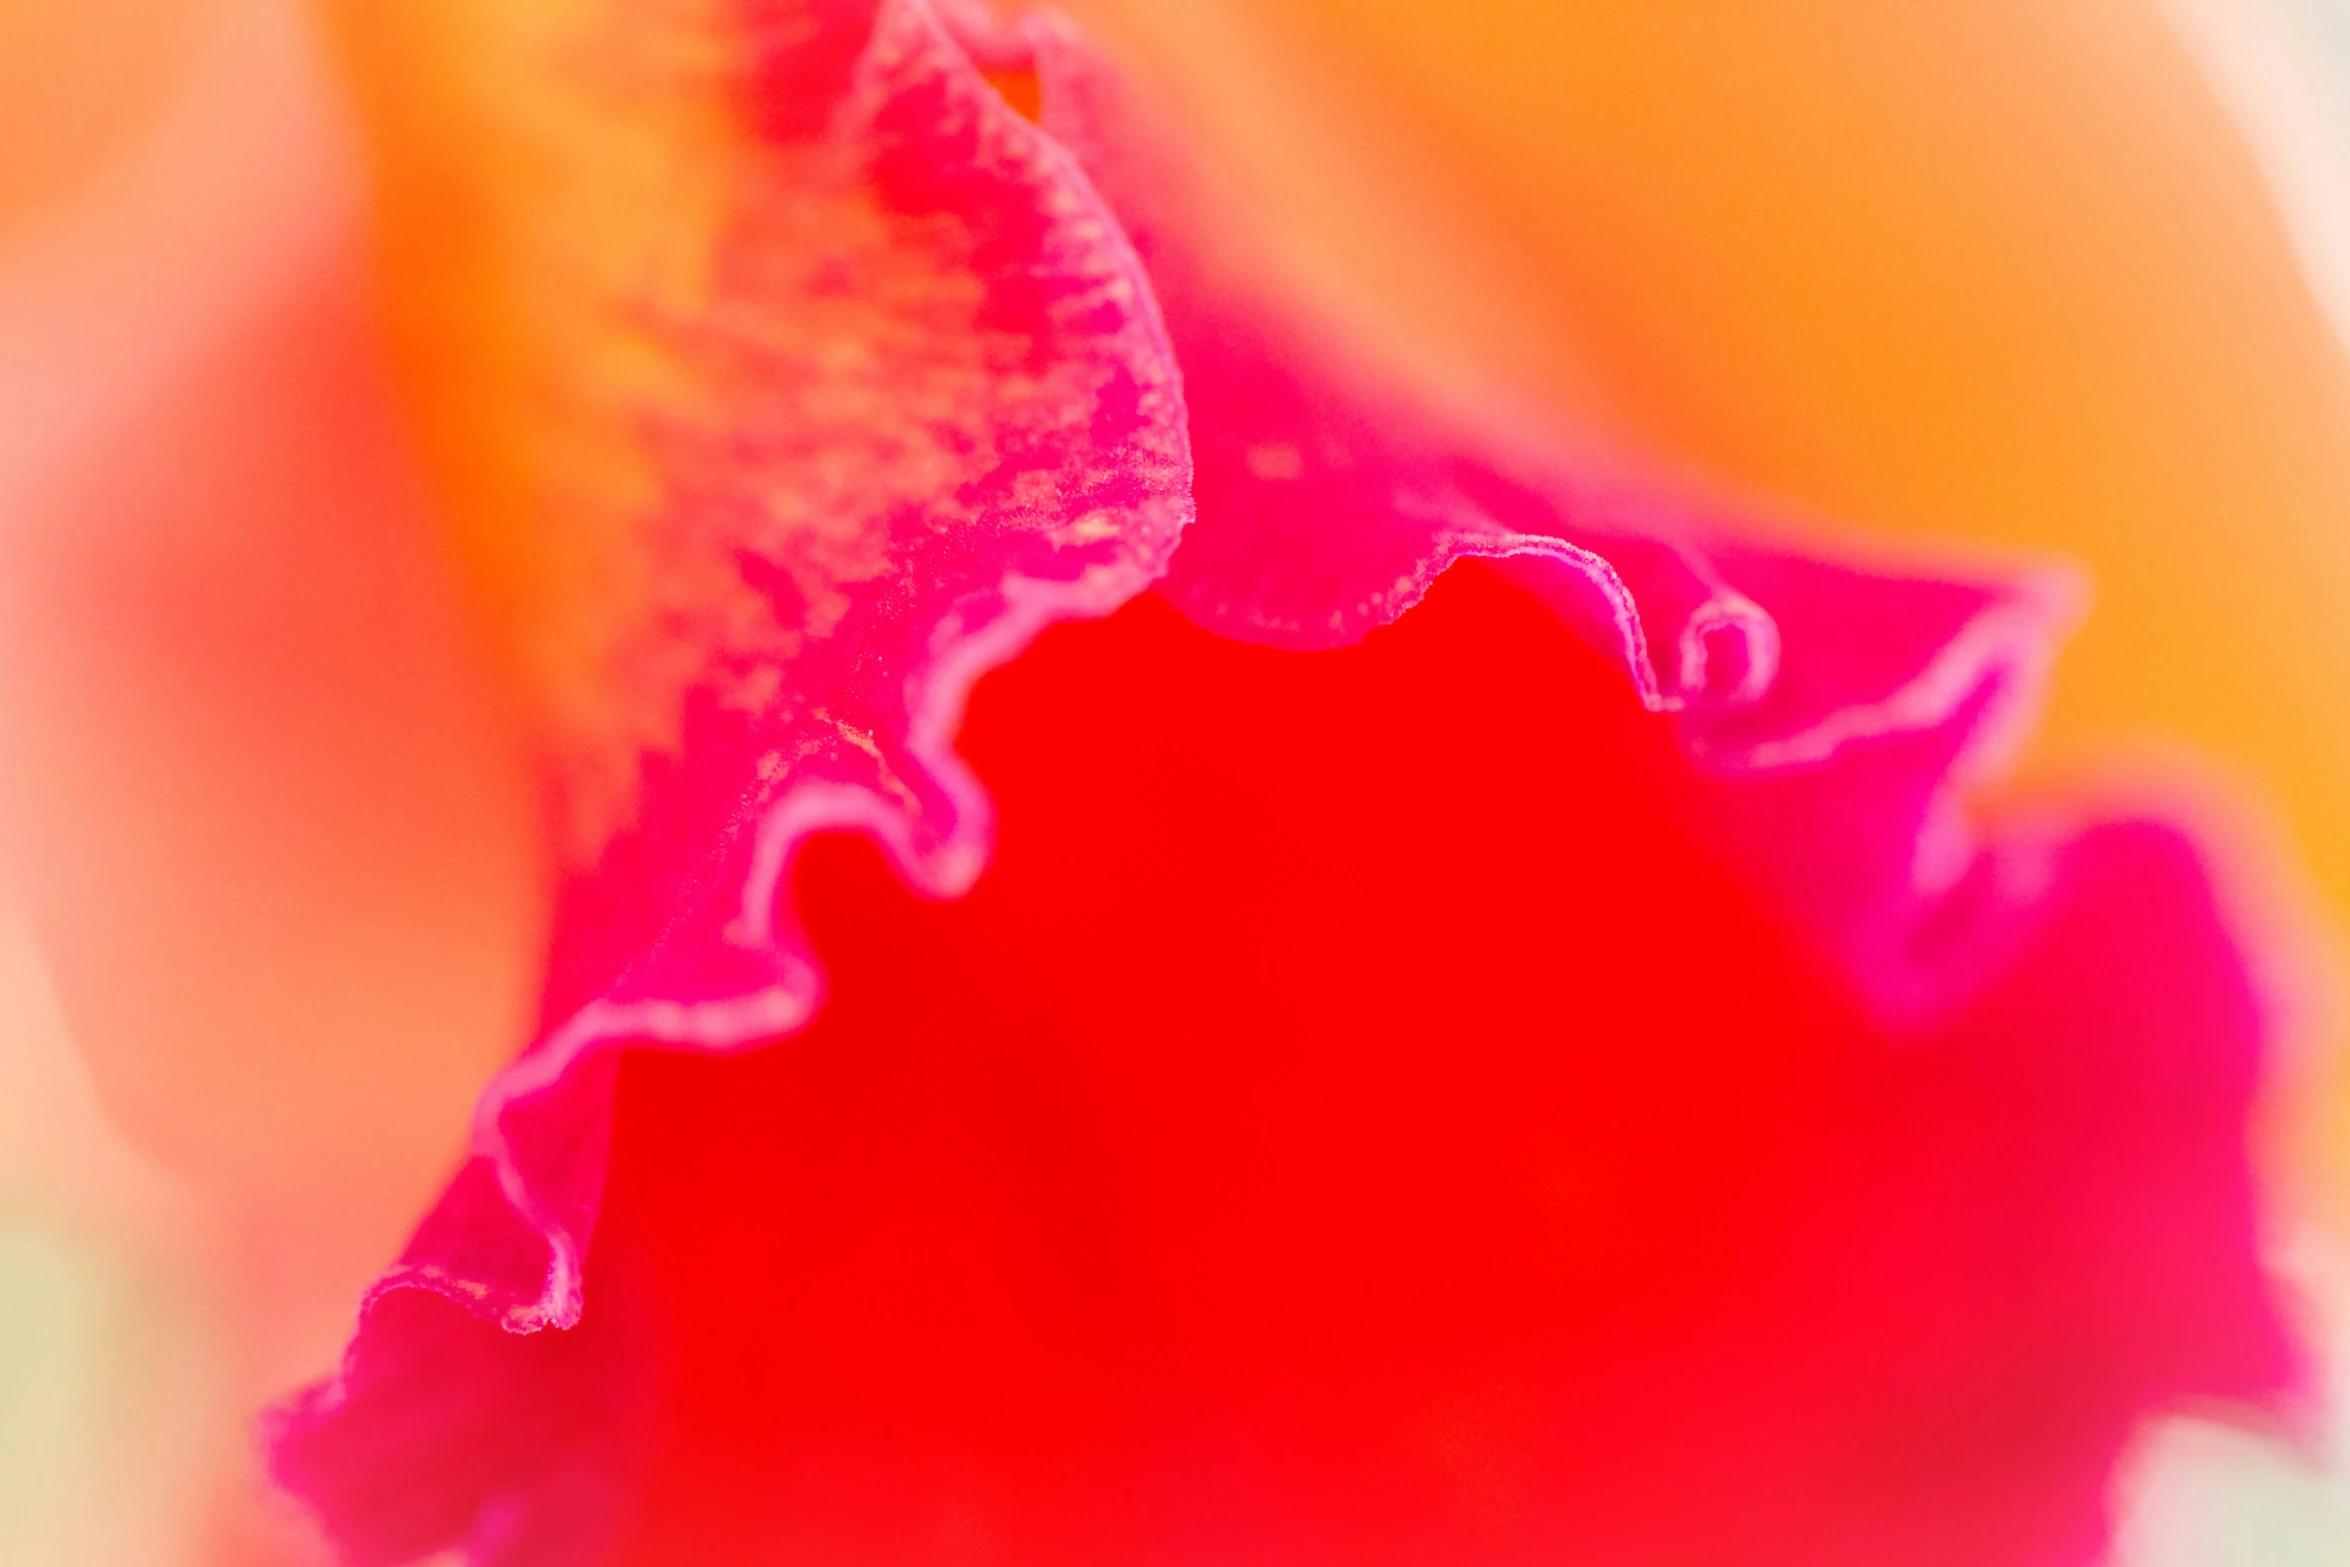 an image of close up of a flower with no petals